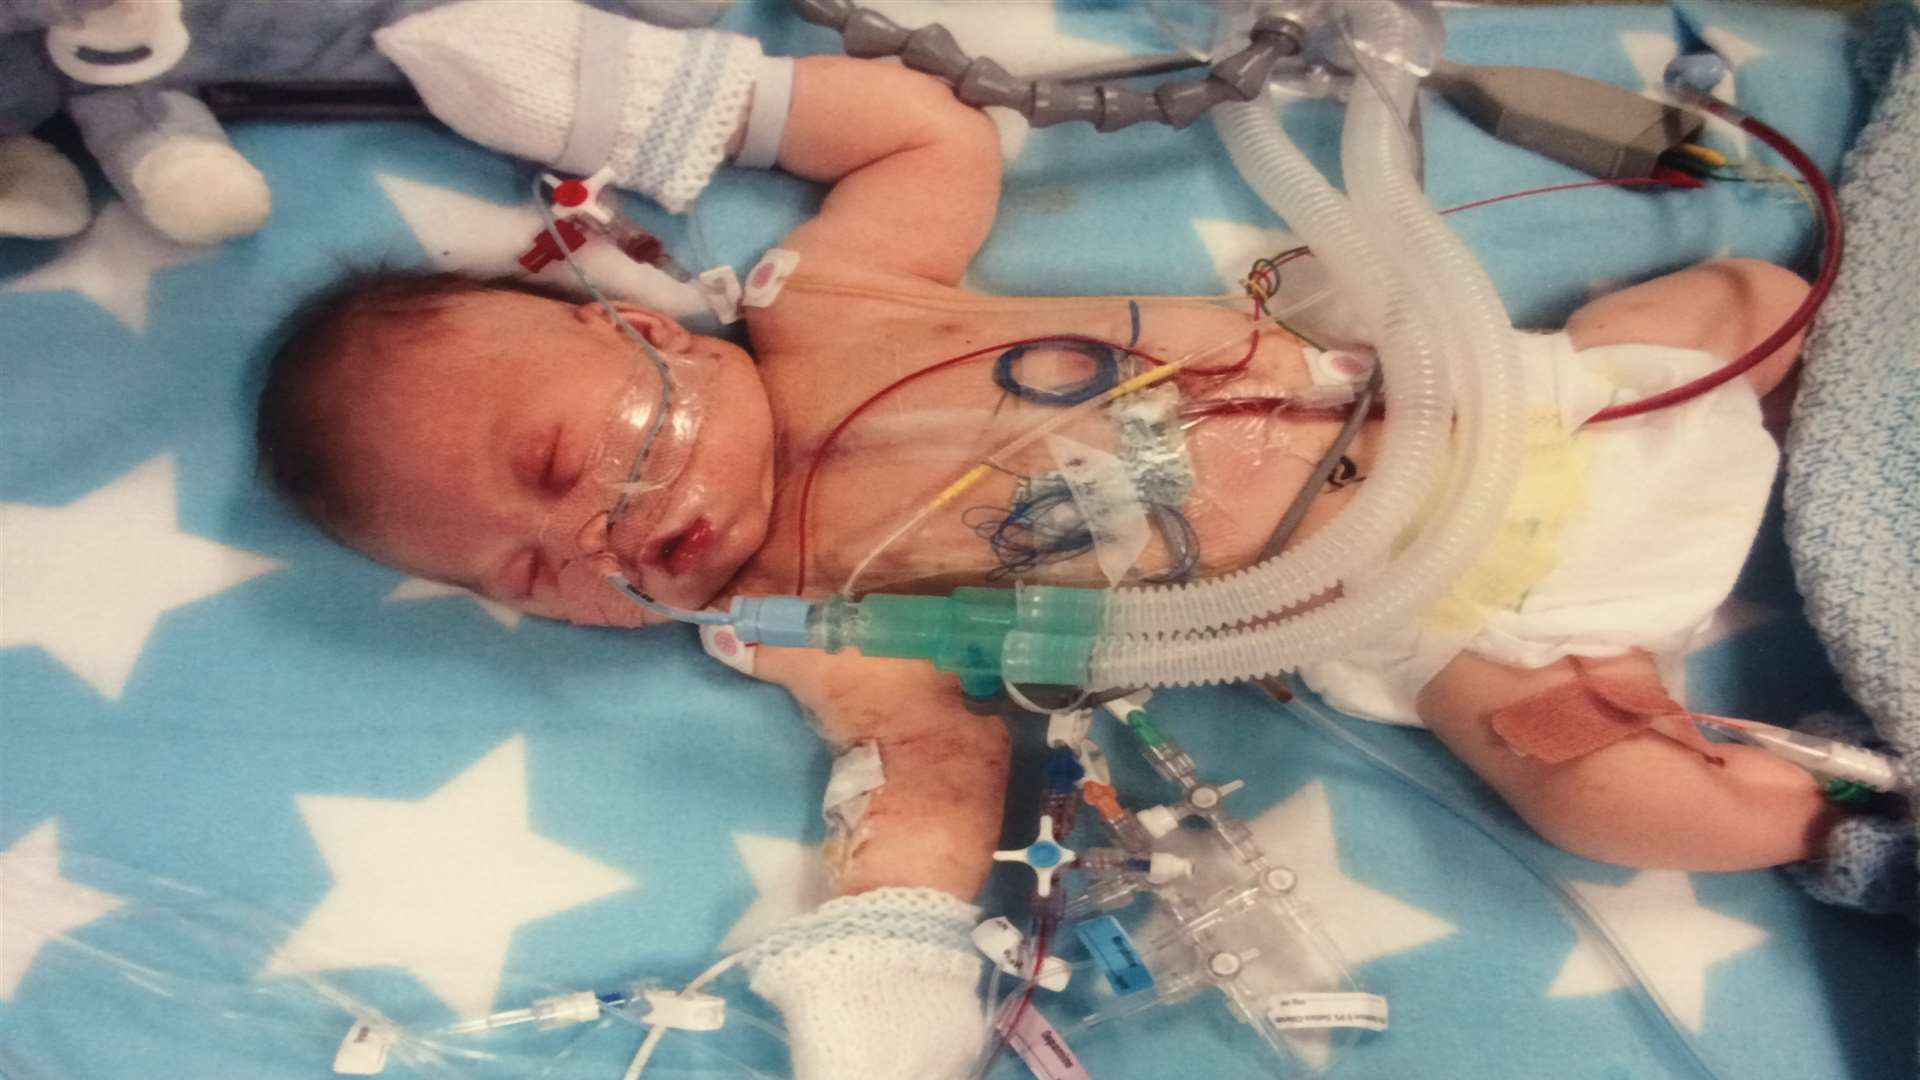 Teddy-James Arnold having just gone through open heart surgery at Evelina London Children's Hospital